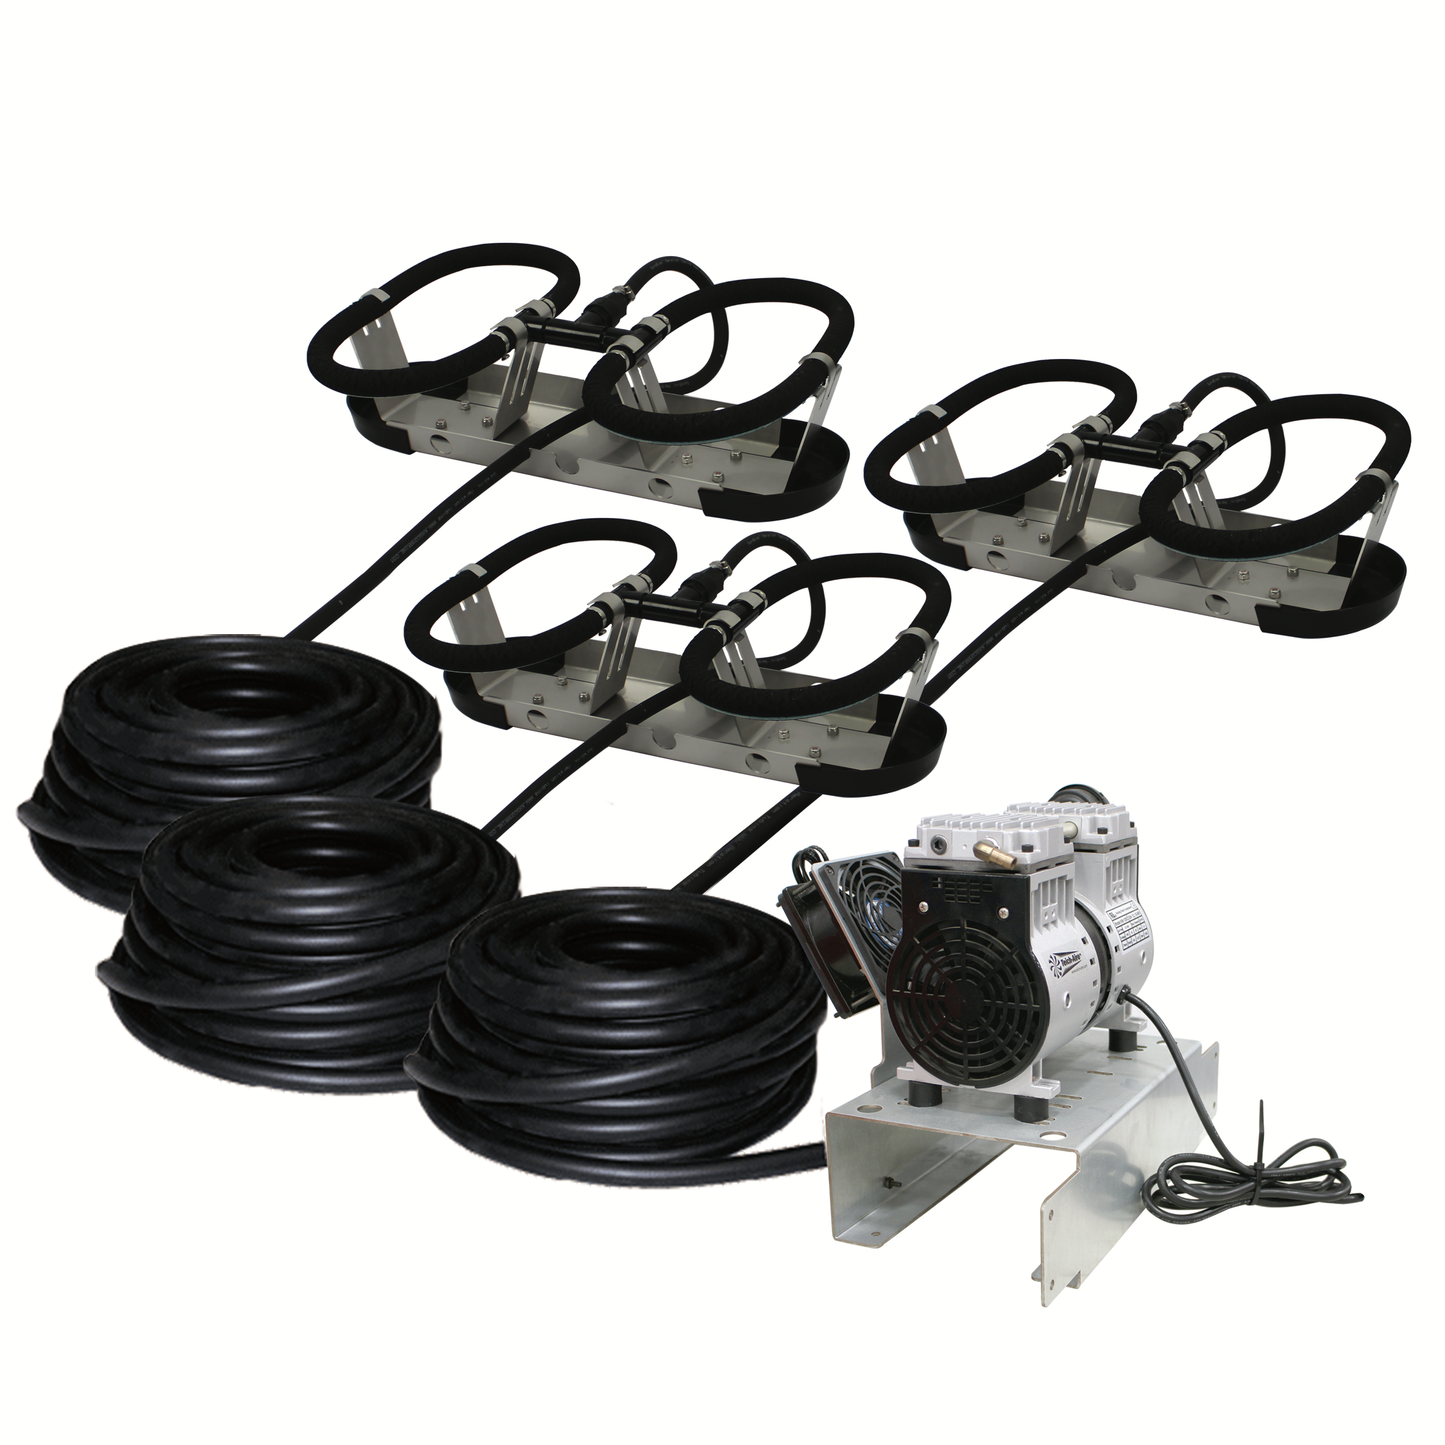 RA3 - Kasco Robust-Aire Pond Aeration System